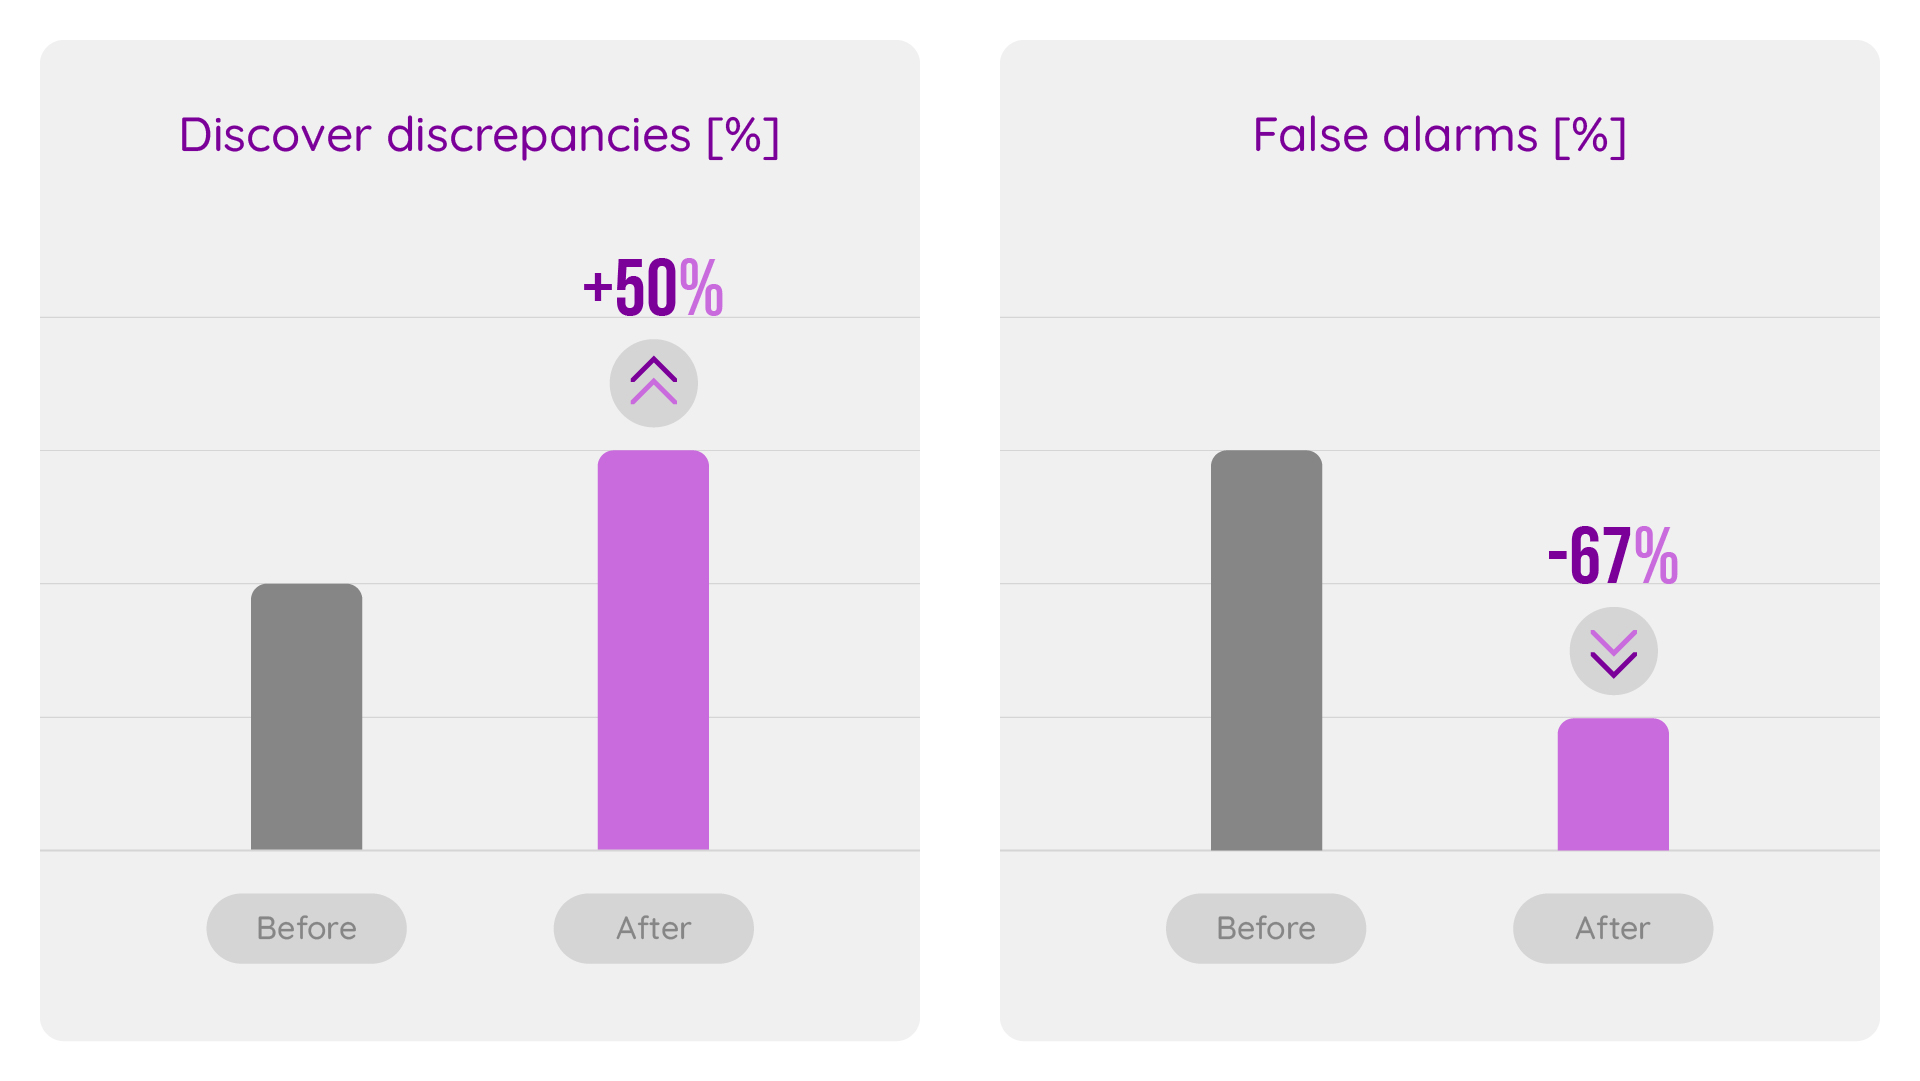 First bar graph shows the rate of detected discrepancies increased by 50%. Second bar graph shows the rate of false alarms decreased by 67%.